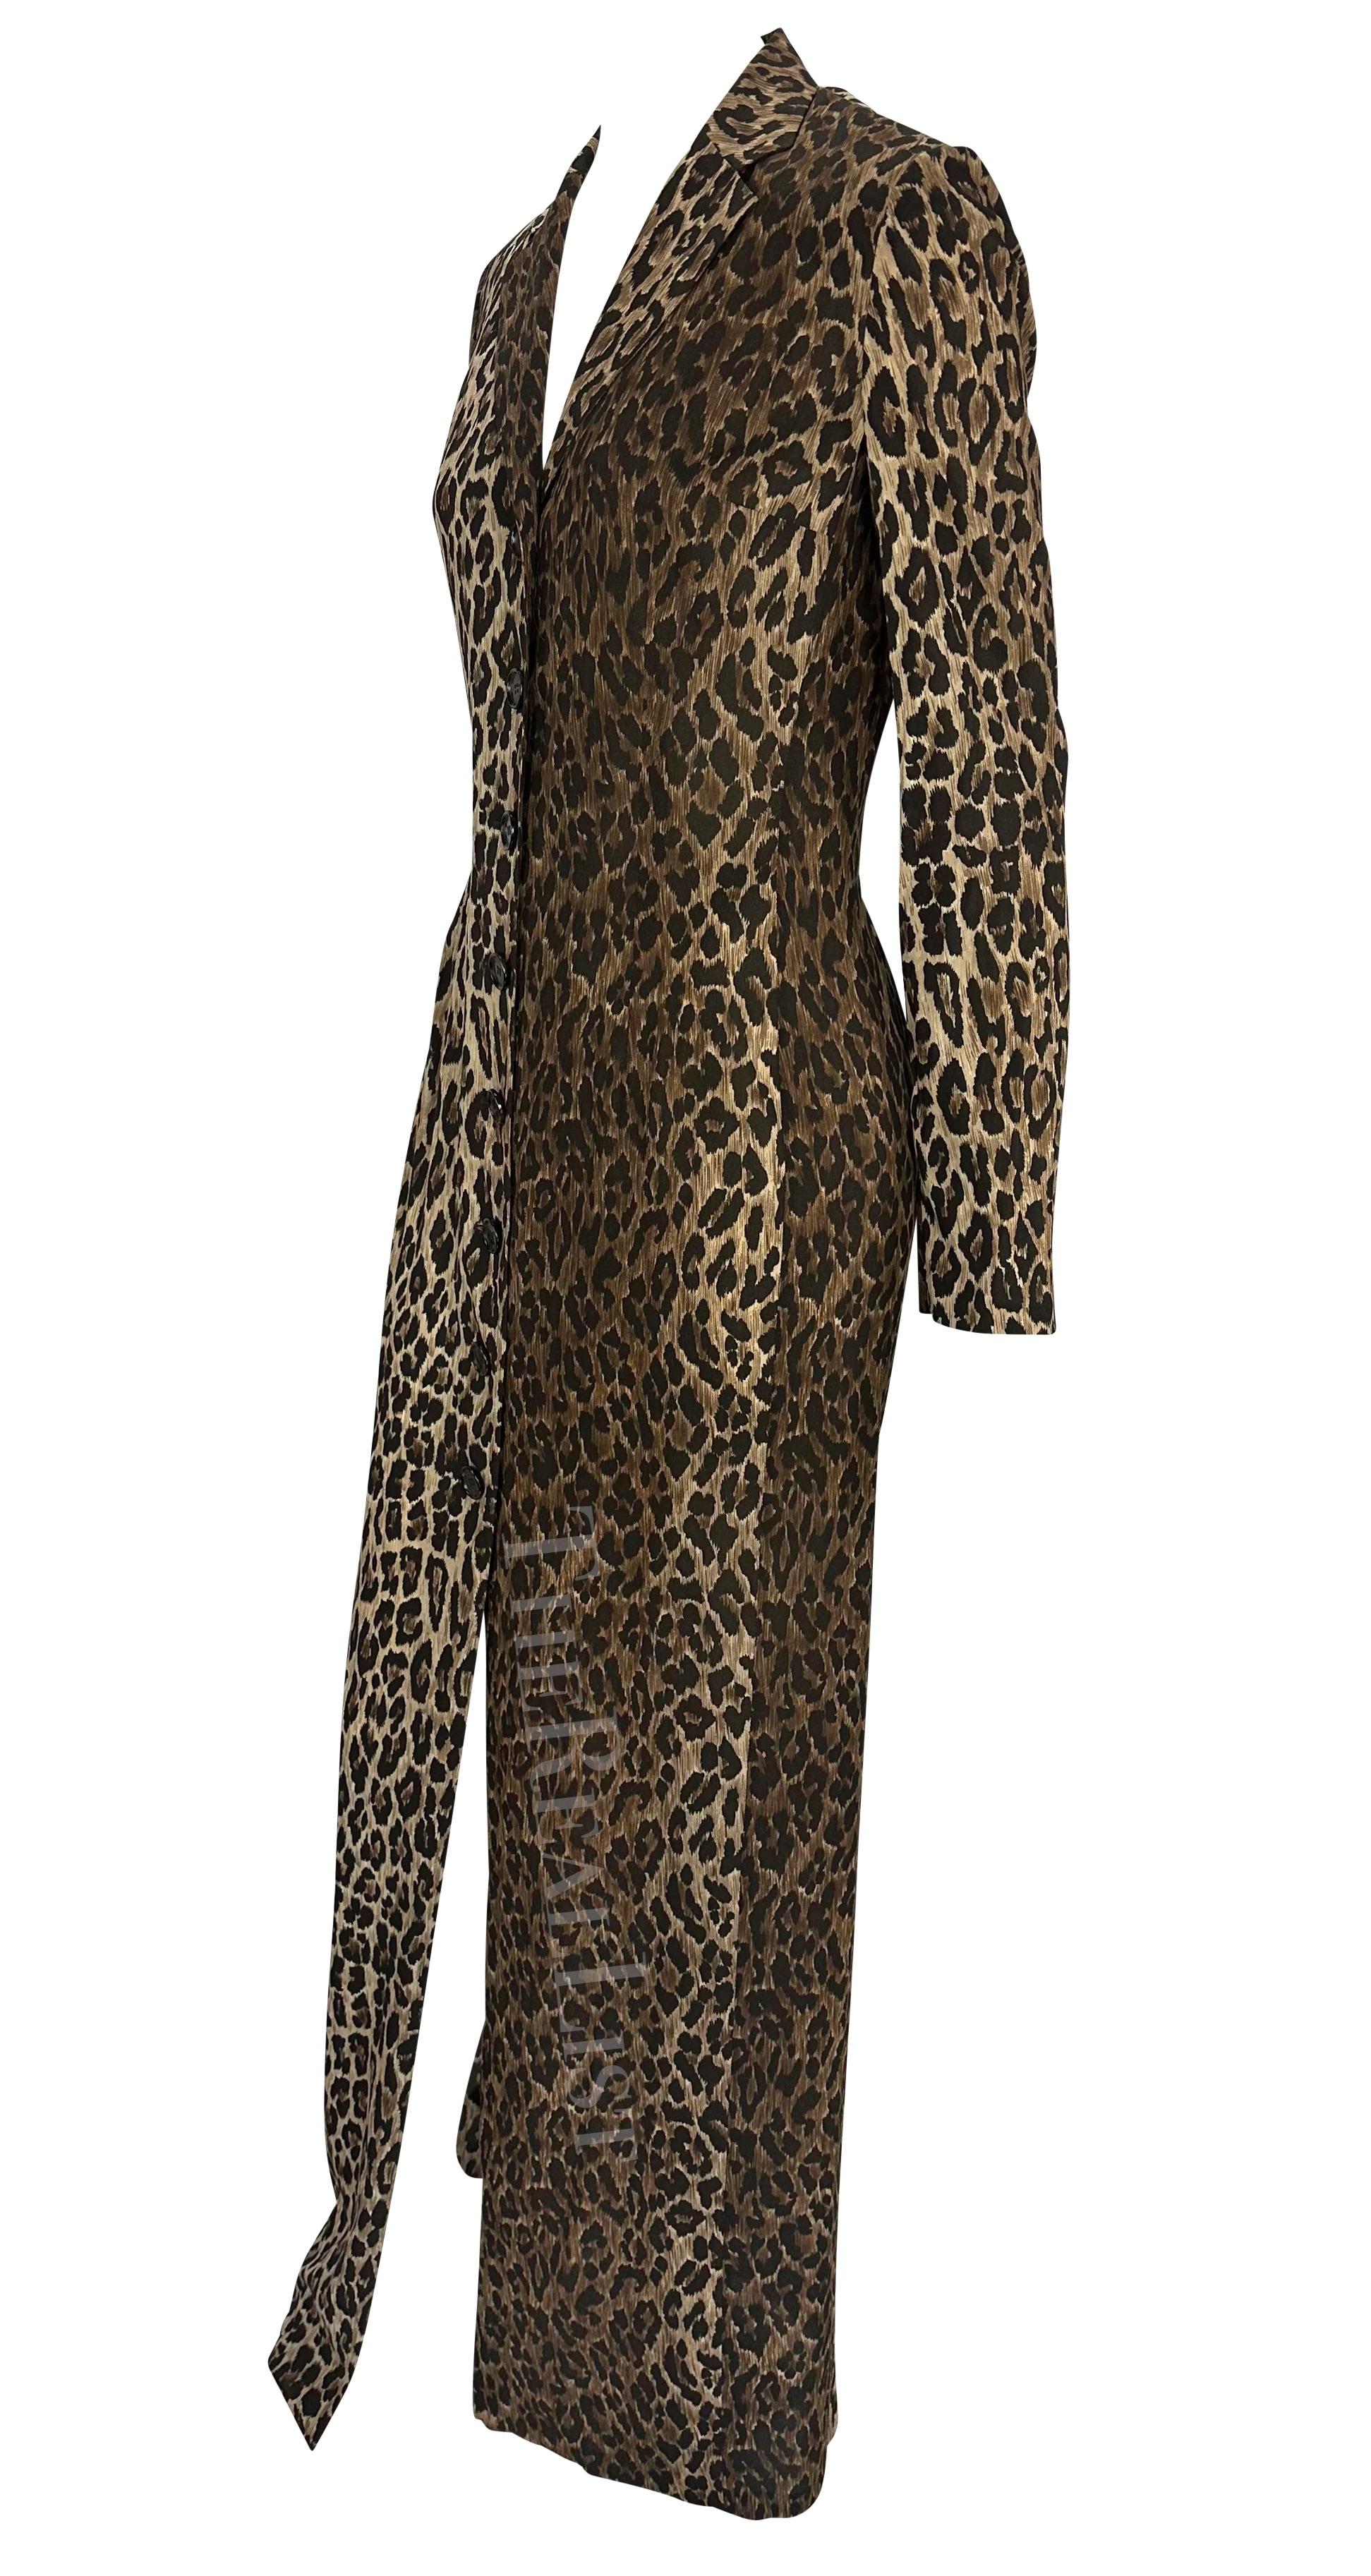 F/W 1997 Dolce & Gabbana Runway Sheer Brown Cheetah Print Maxi Coat Dress In Excellent Condition For Sale In West Hollywood, CA